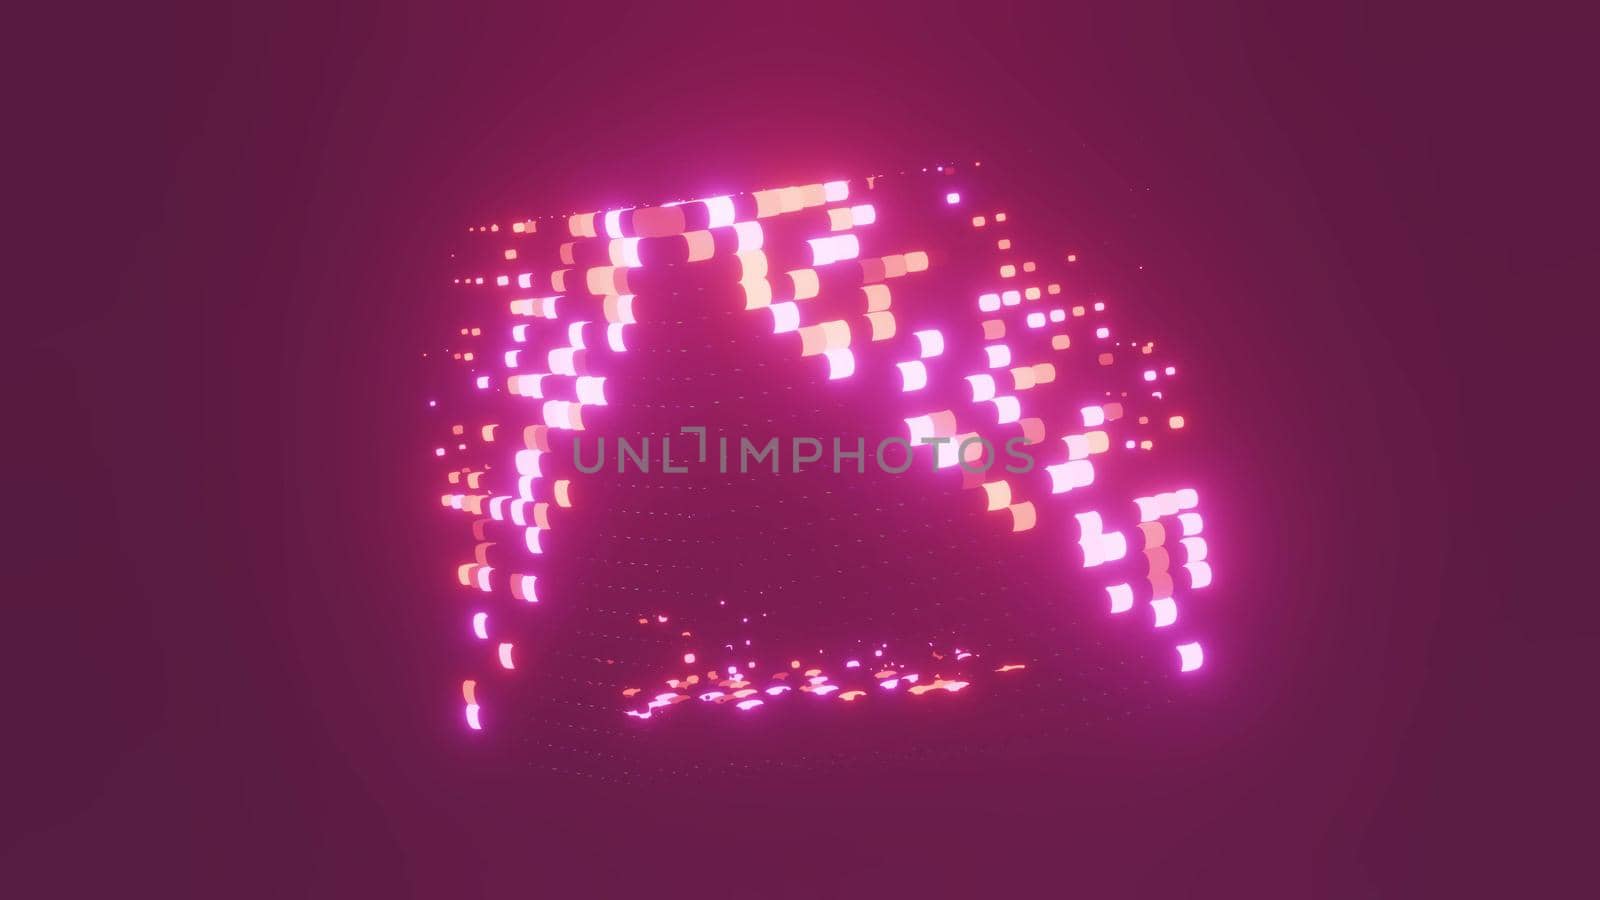 4K UHD 3D illustration of small red and magenta cubes glowing with vivid neon light and forming futuristic geometric shape